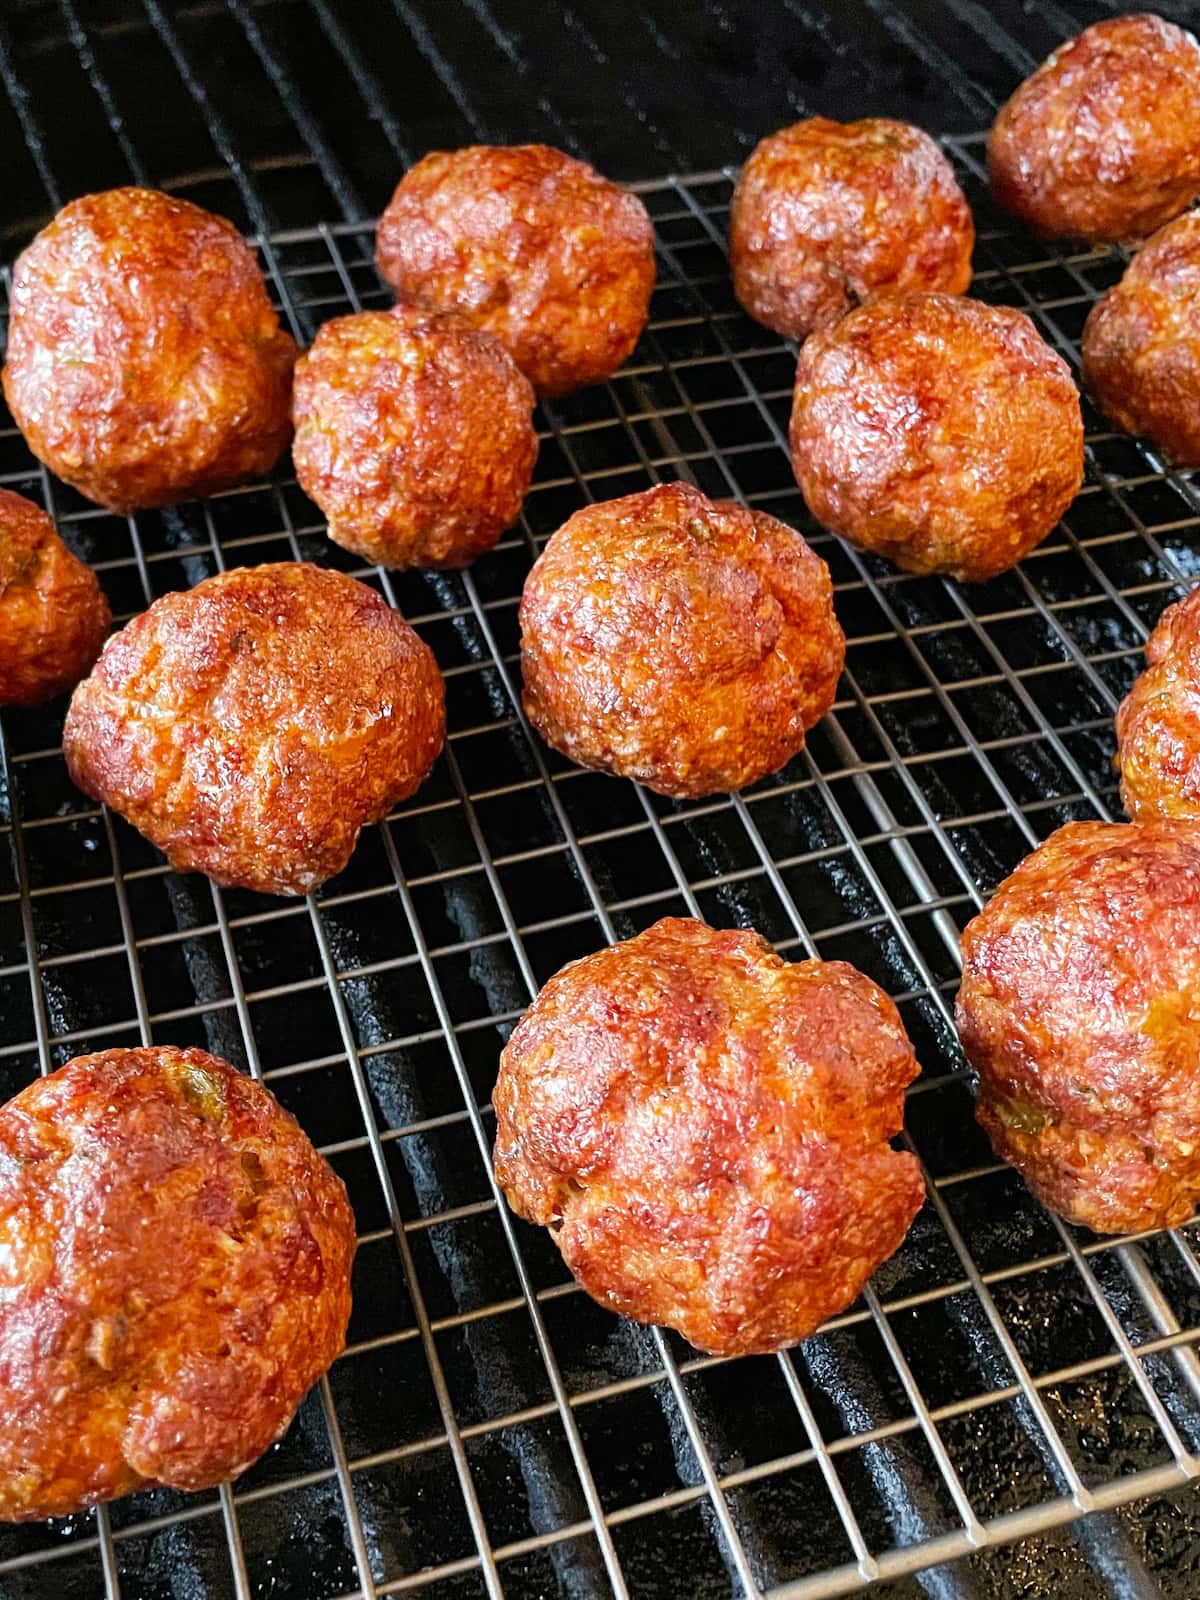 Meatballs after smoking, before adding sauce